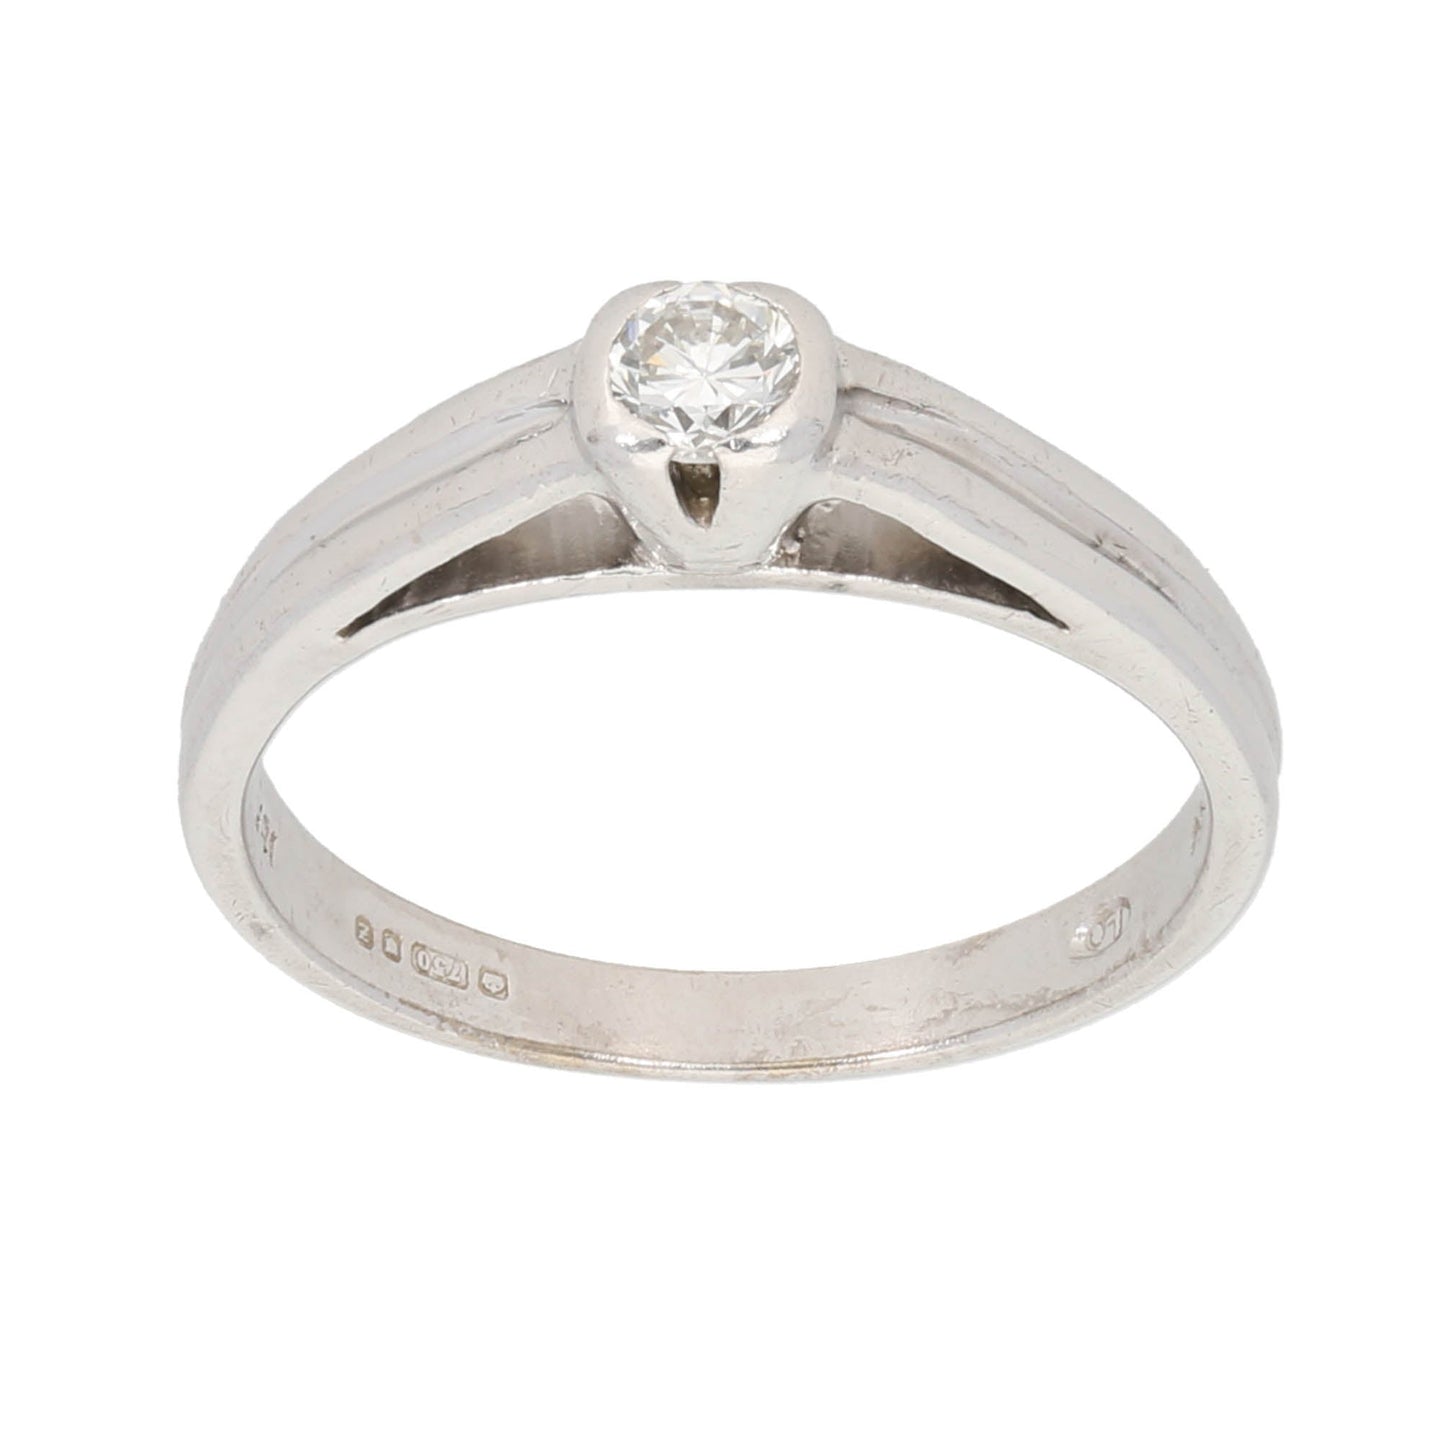 18ct White Gold 0.20ct Diamond Solitaire Ring Size N